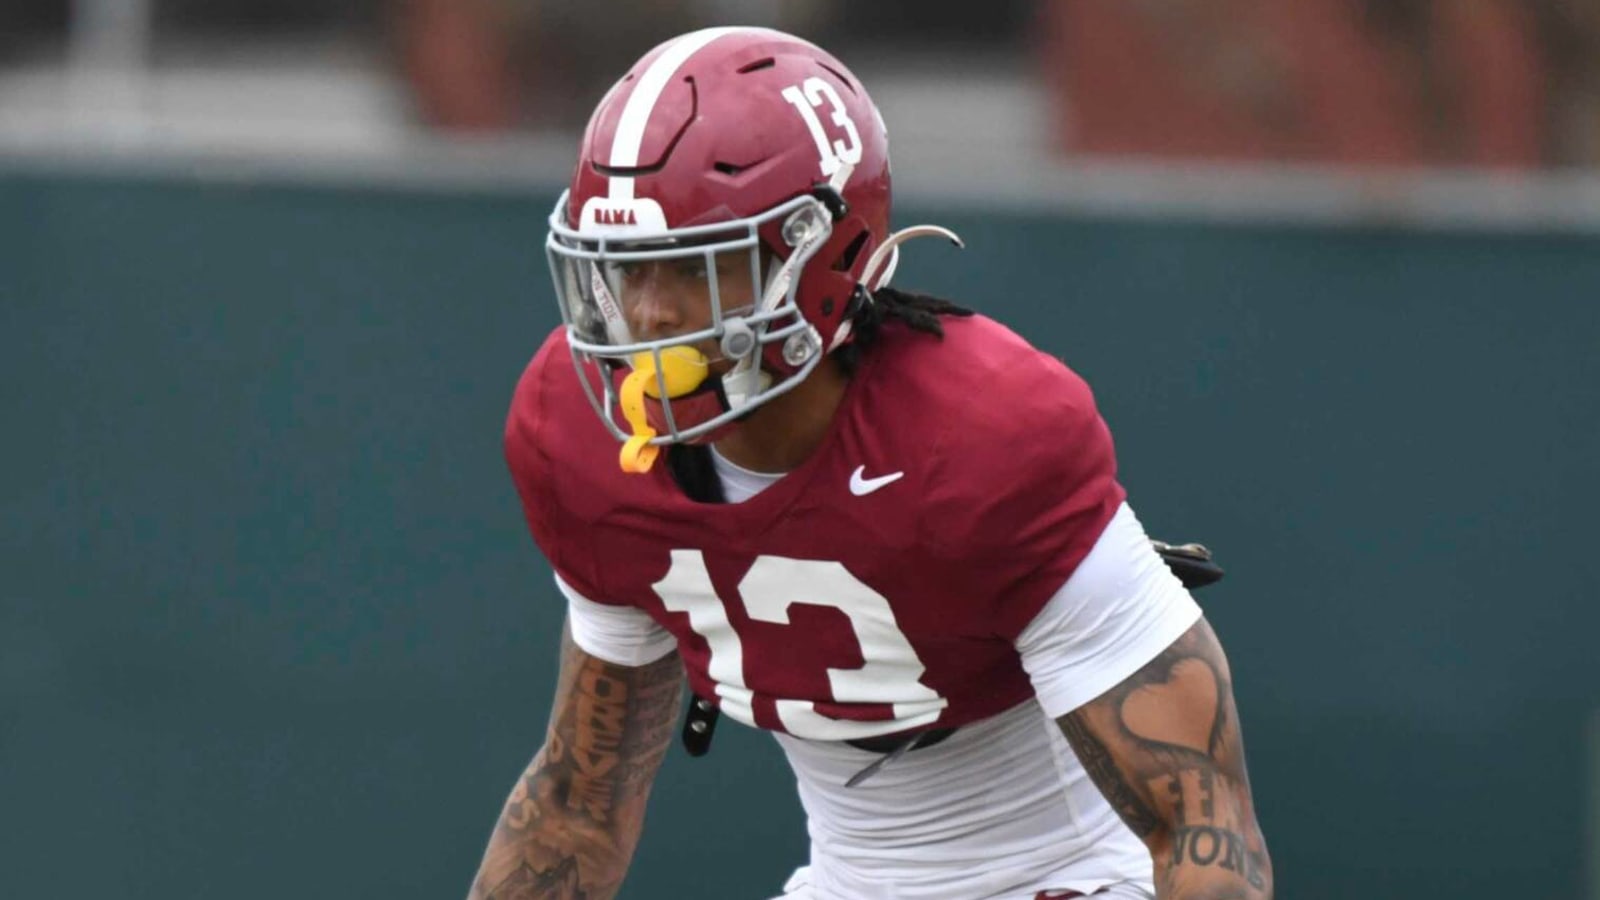 Alabama DB reacts to Detroit Lions having Brian Branch and Terrion Arnold